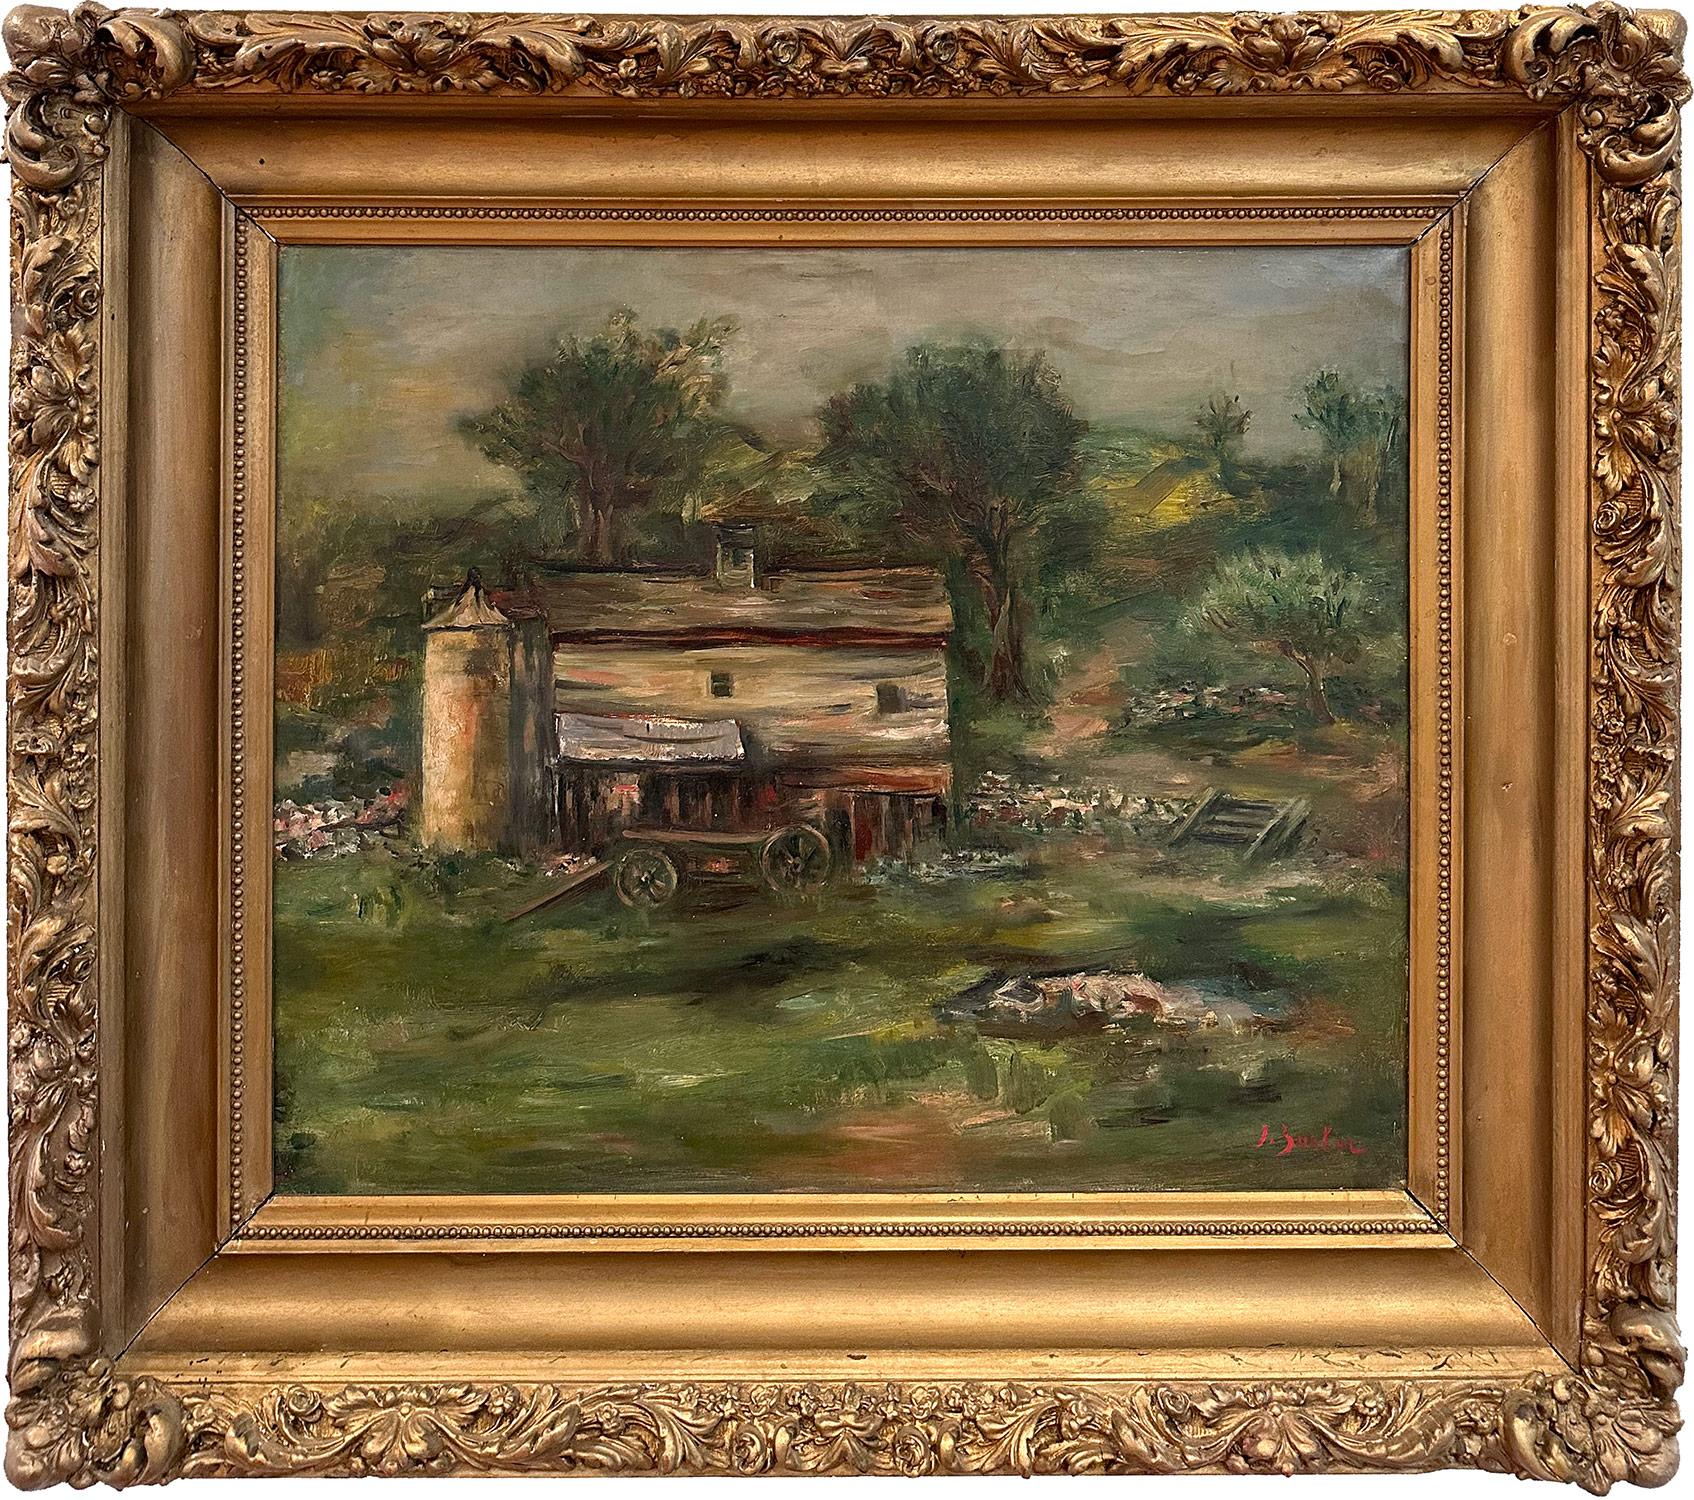 Jacques Zucker Landscape Painting - "Sunday at the Barn" Post-Impressionist Landscape Oil Painting on Canvas Framed